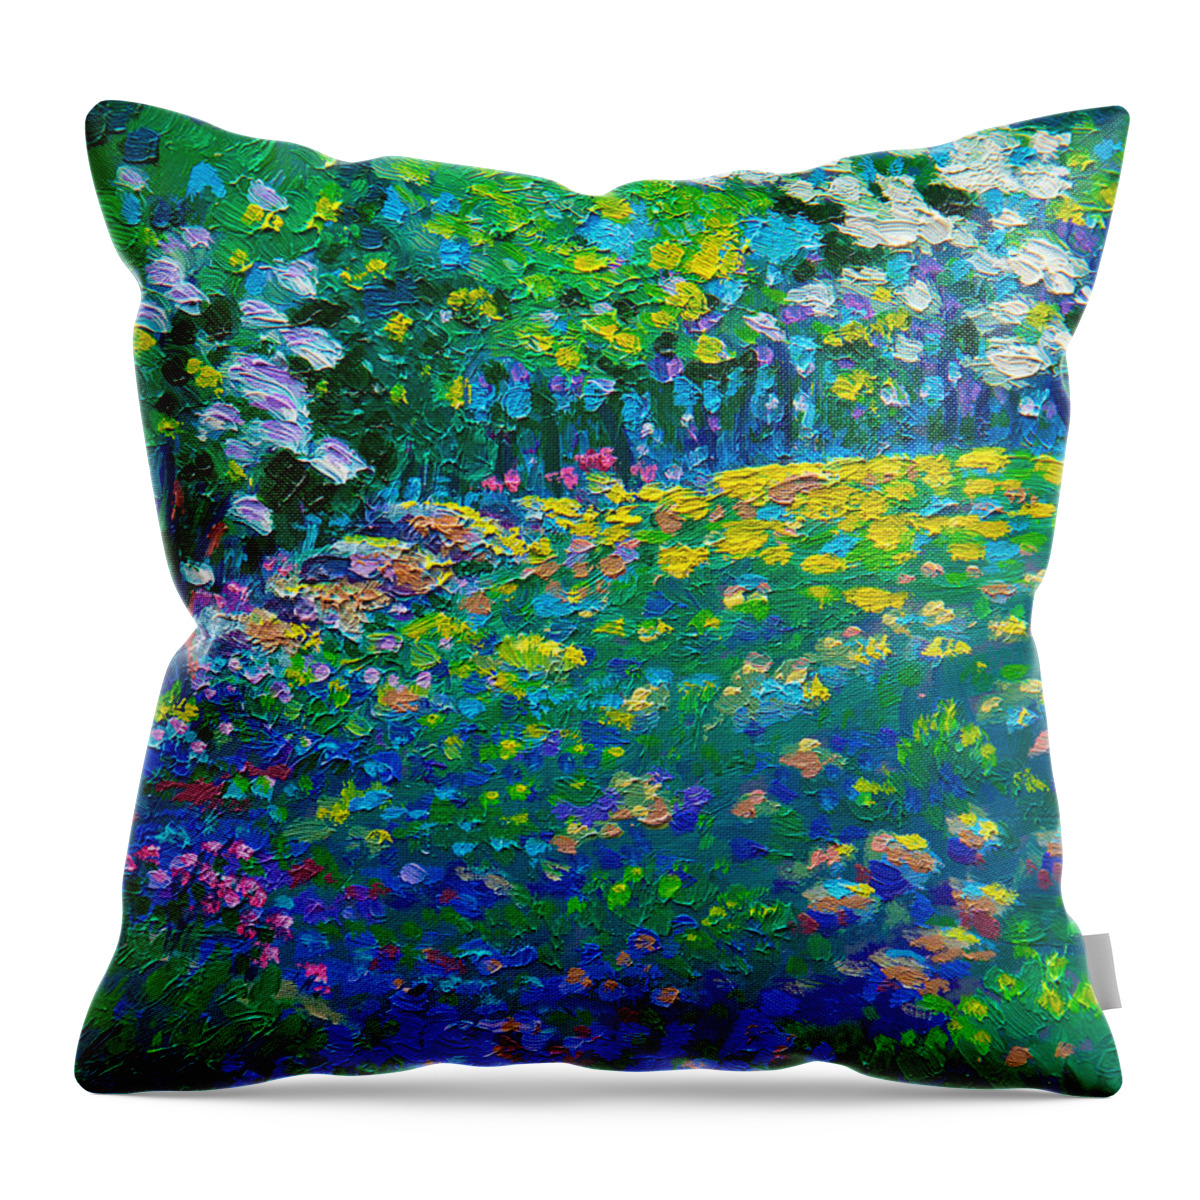 Pennsylvania Throw Pillow featuring the painting Dogwoods Day by Michael Gross